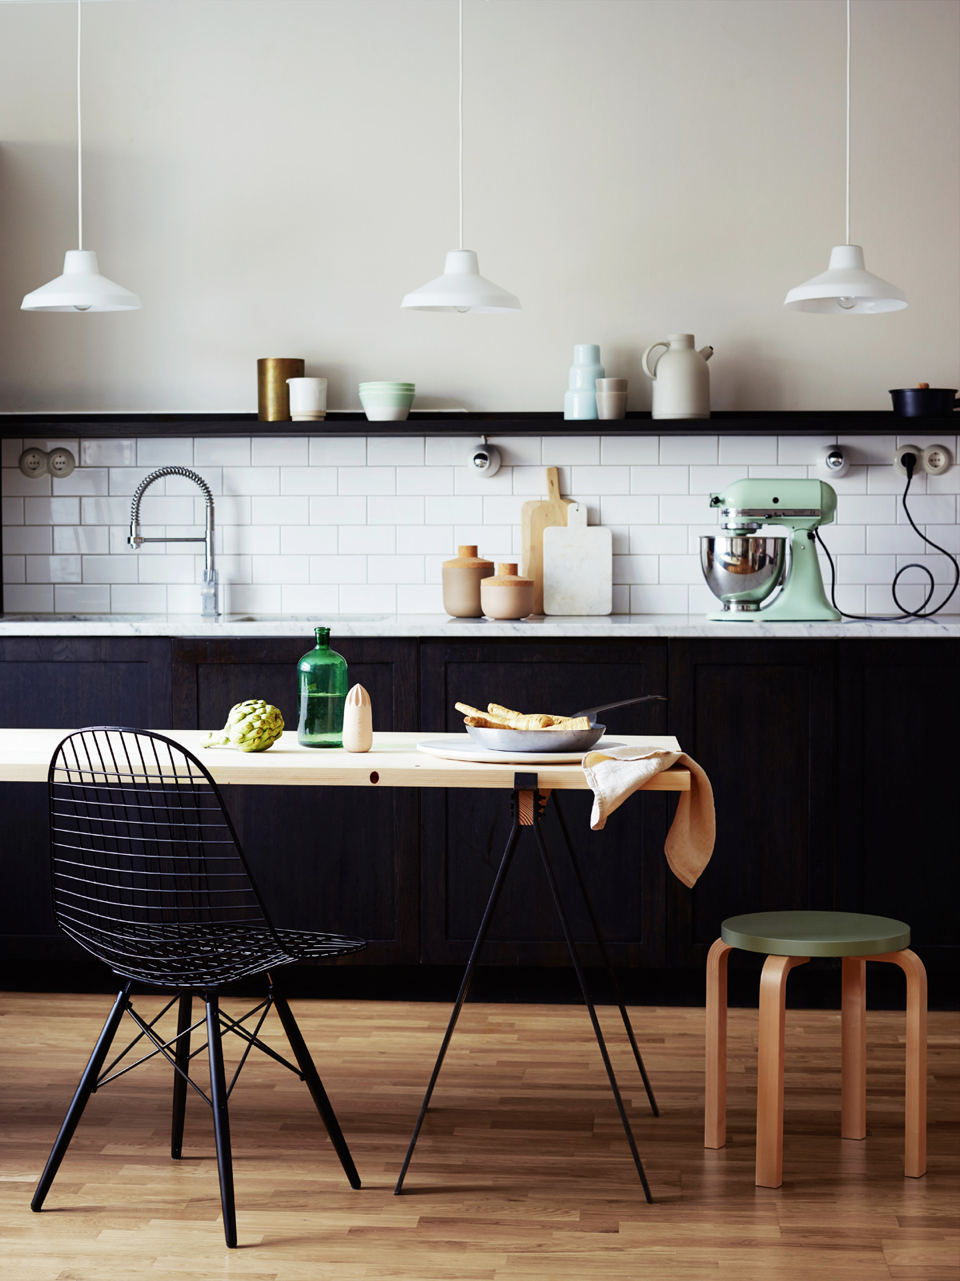 #Marble bench and #subway tiles paired with simple pendants and table give this #black kitchen featured in Elle an industrial vibe. From The #Monochrome #Kitchen, the RSD Blog.